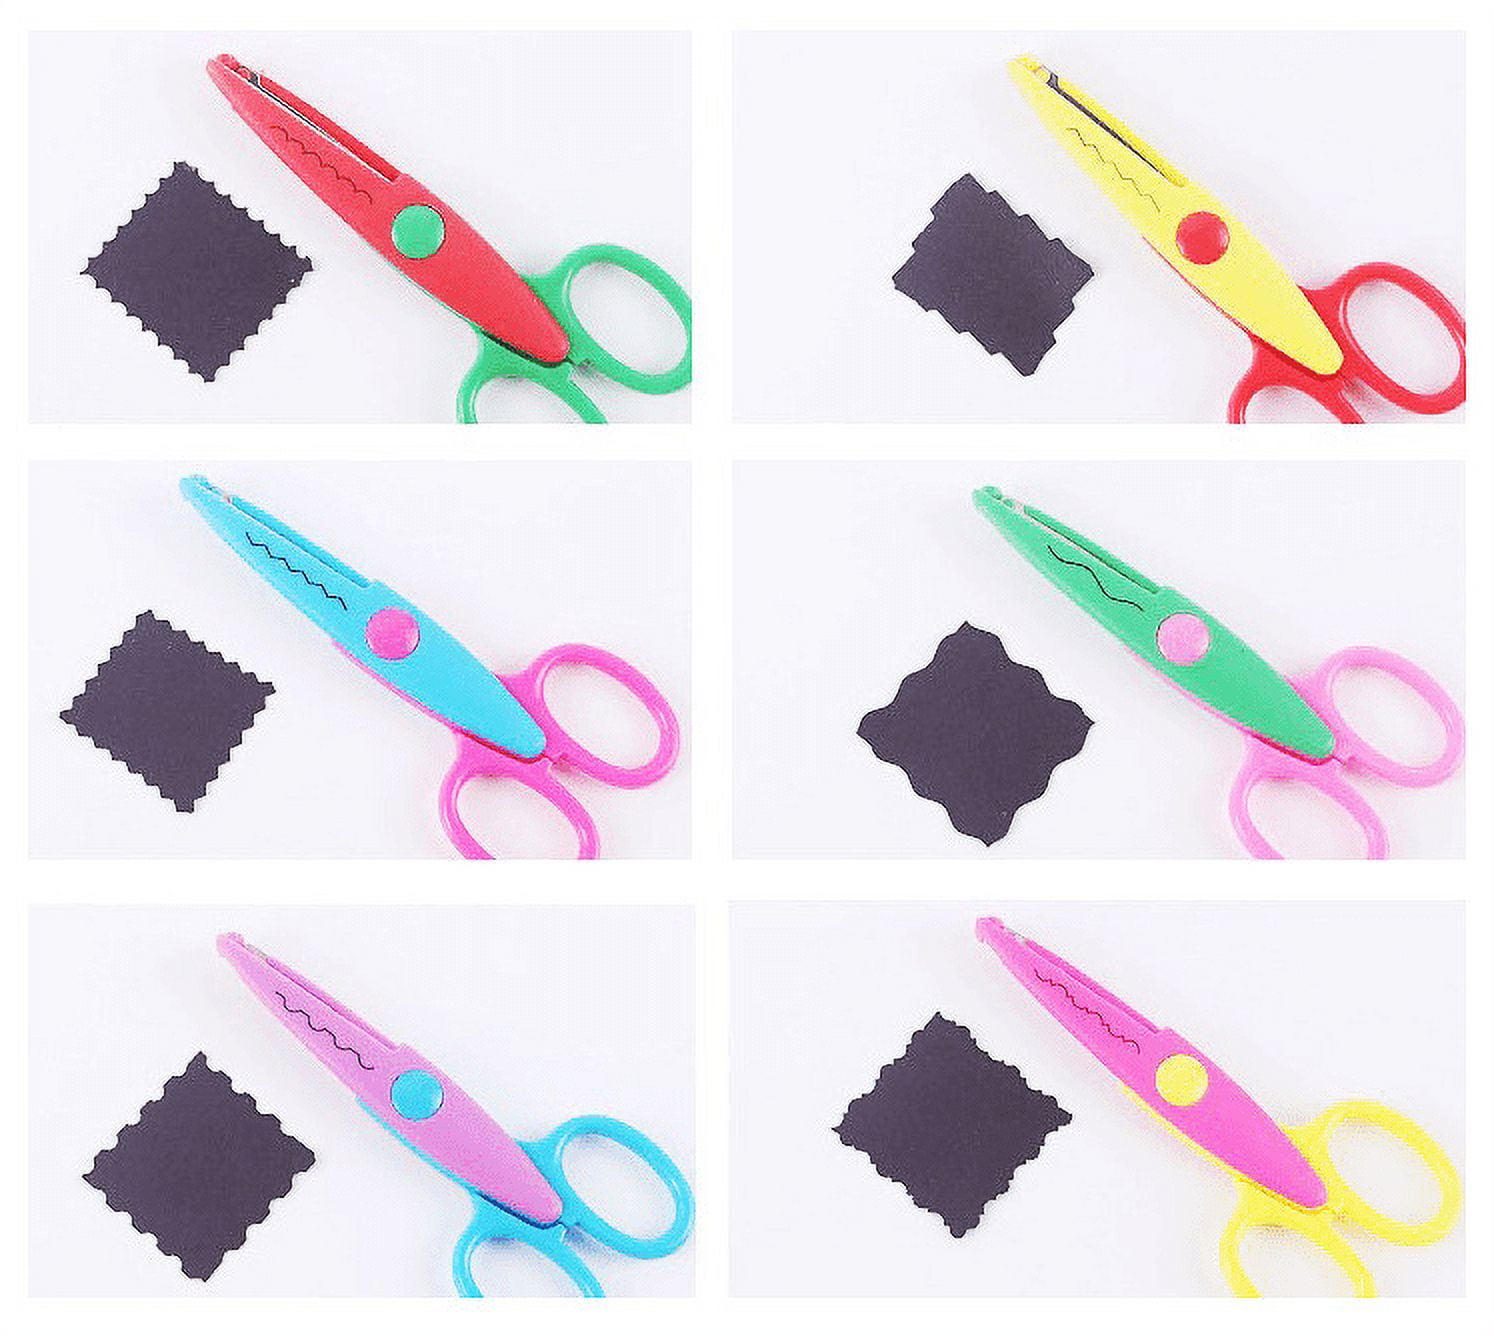 Incraftables 6pcs Decorative Pattern Edge Craft Scissors with 10pcs Small  Paper Hole Punch Shapes & 10pcs Colorful Papers. Best for Fun DIY  Scrapbooking & Crafting Projects for Kids & Adults